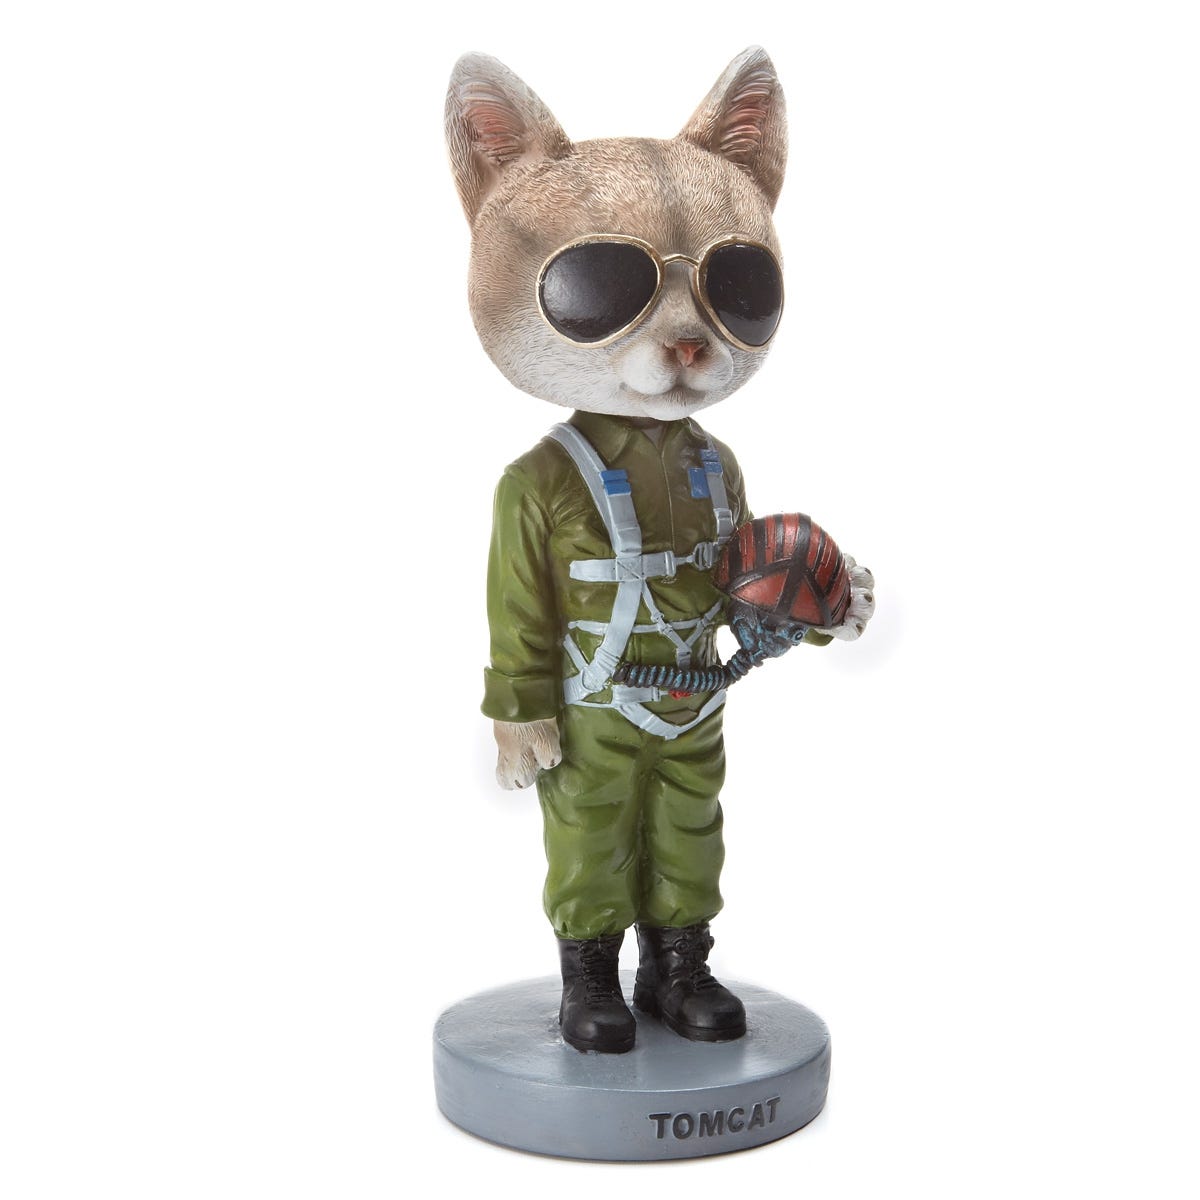 Tomcat Bobblehead - from Sporty's Wright Bros Collection